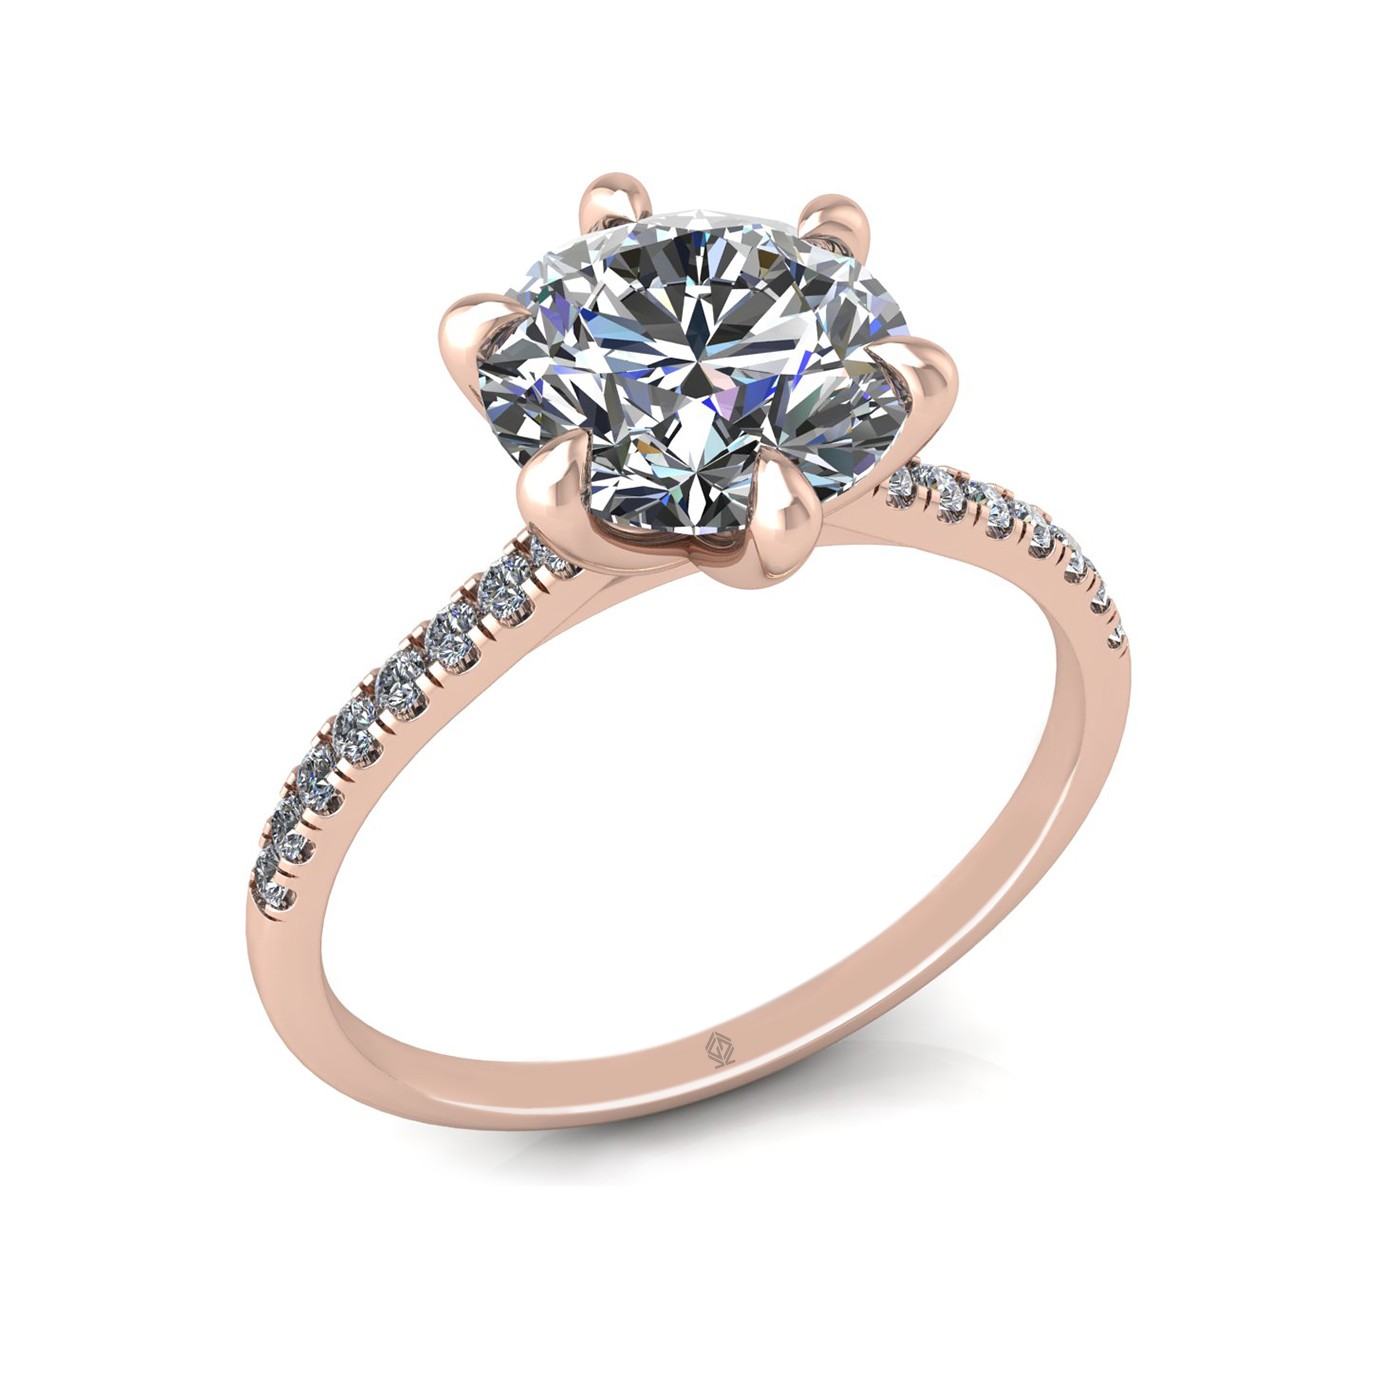 18k rose gold 2,00 ct 6 prongs round cut diamond engagement ring with whisper thin pavÉ set band